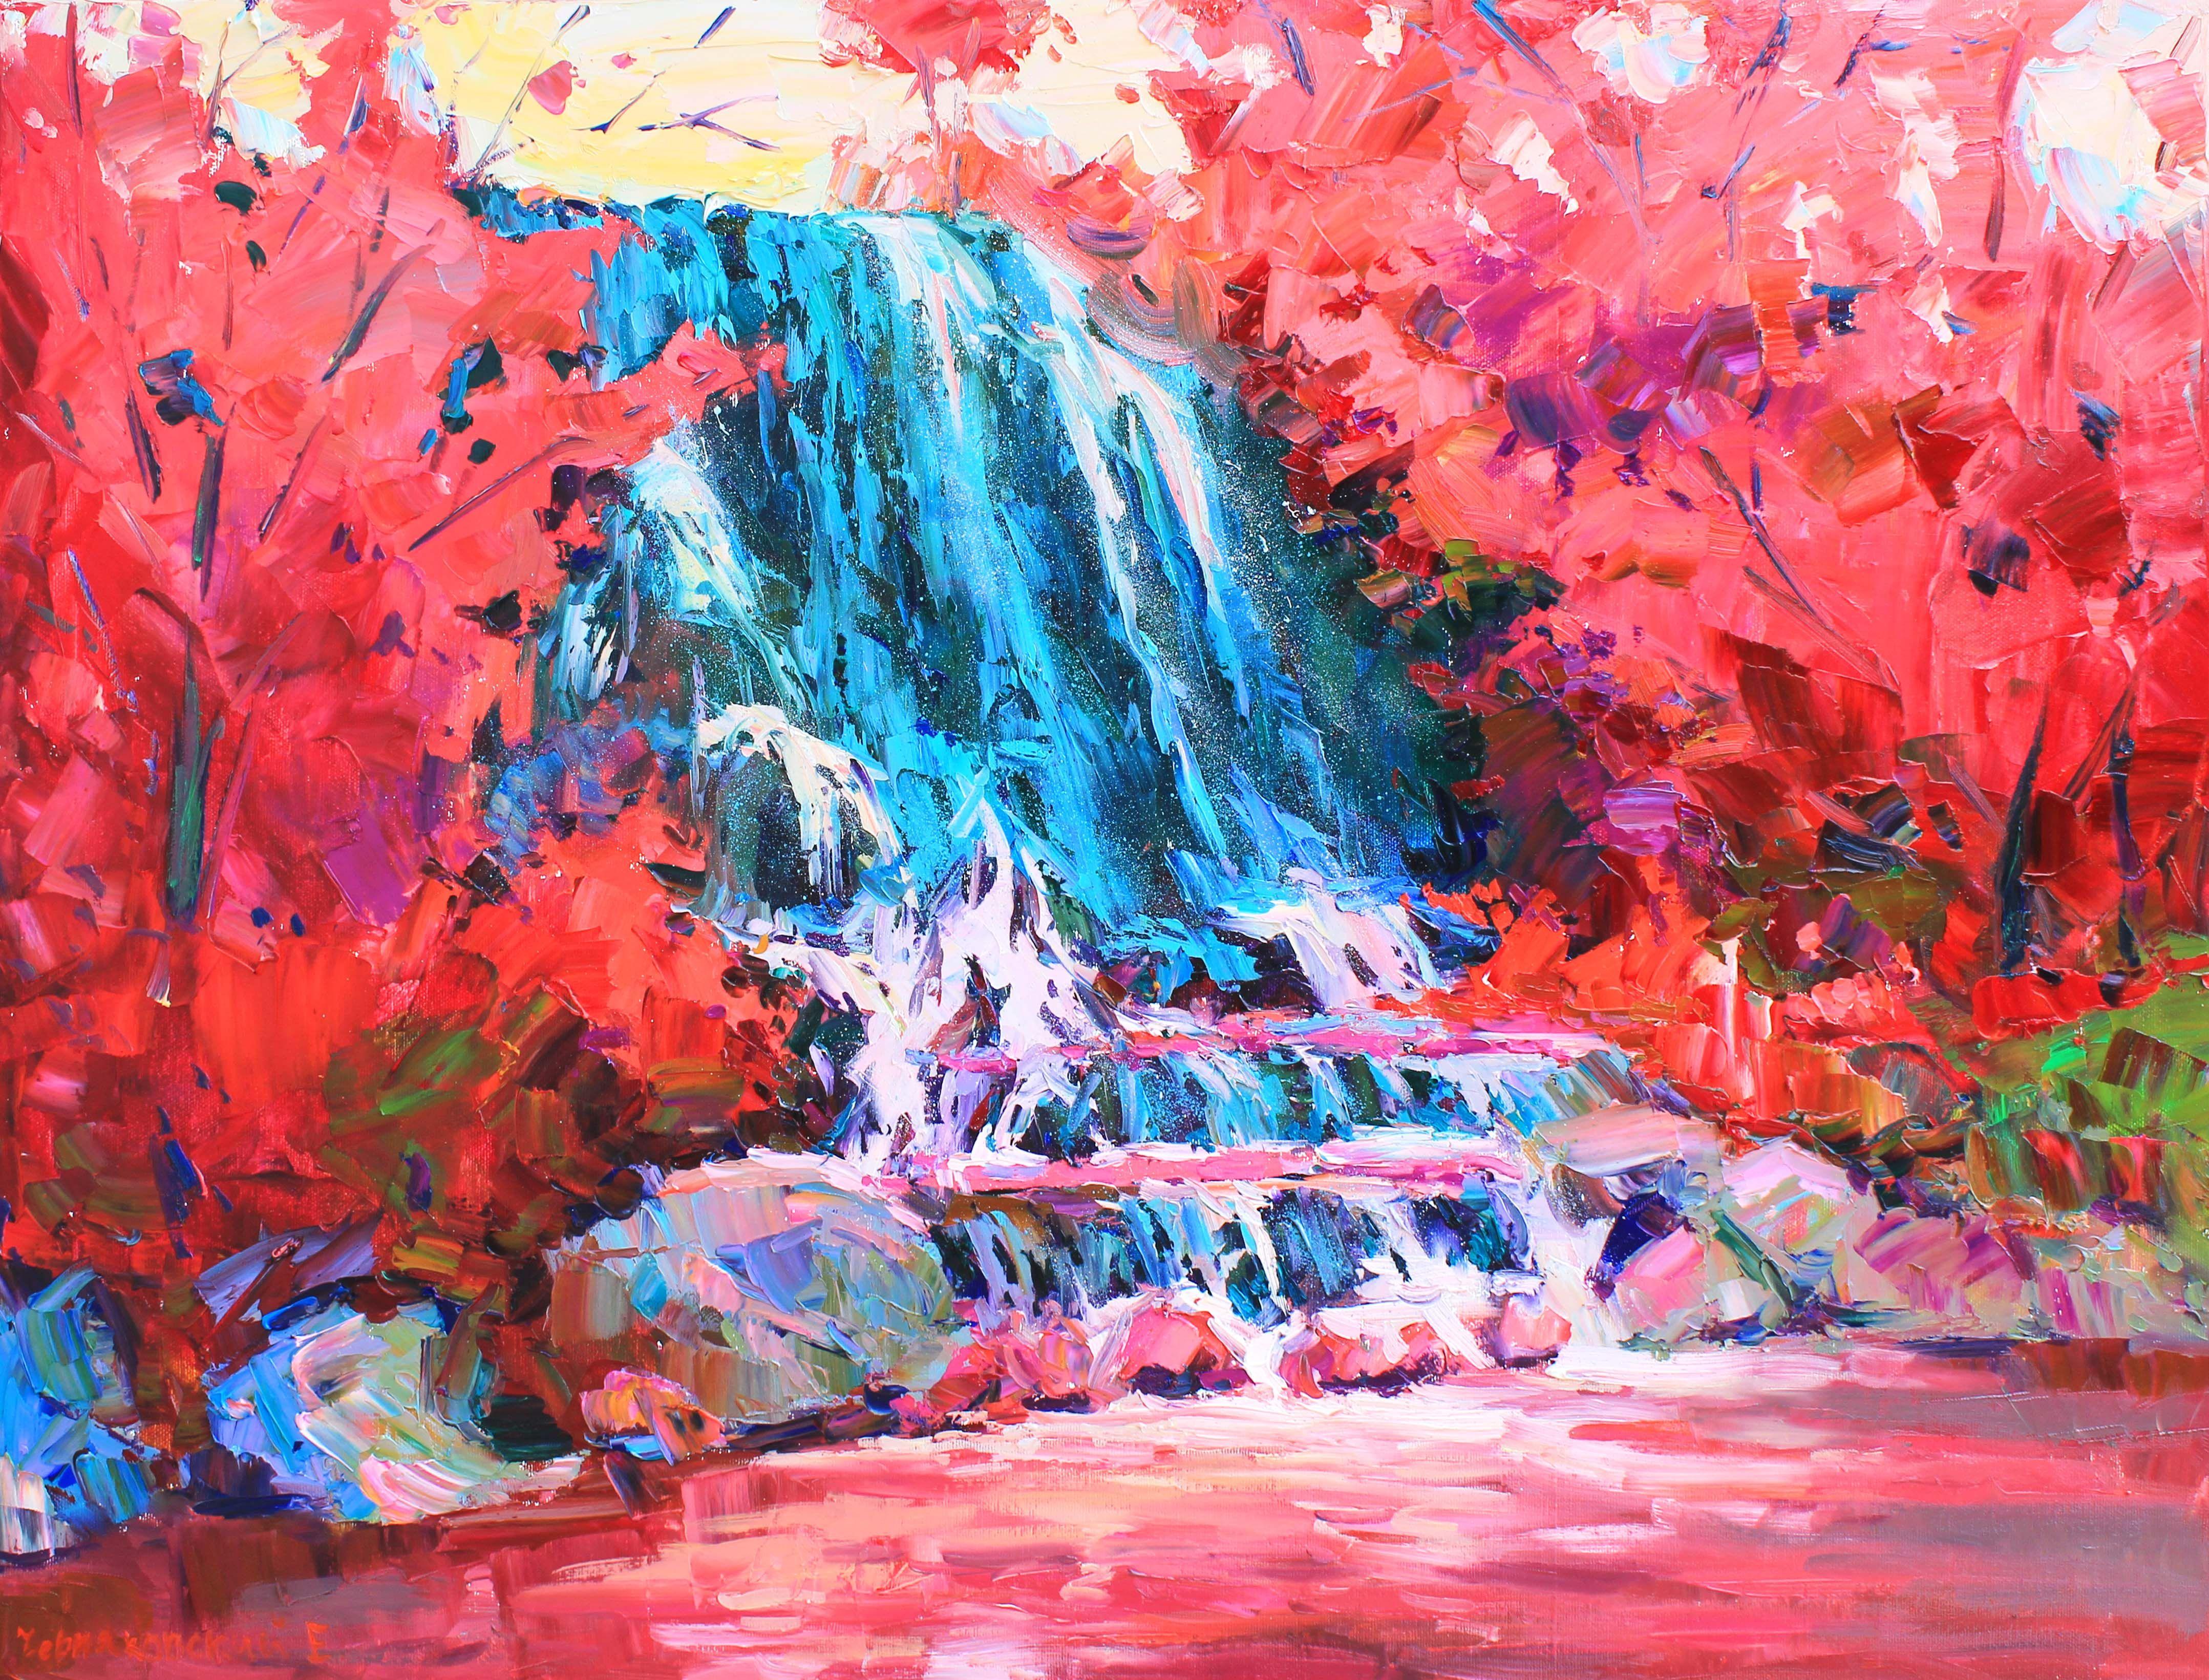 Original Oil painting by Ukrainian artist Evgeny Chernyakovsky    " Waterfall"  60.0 X 80.0 CM / 23.6 X 31.4 IN  HIGH QUALITY oil on canvas  Signed on the front and back  Dated 2022  Good condition  GUARANTEE OF AUTHENTICITY   :: Painting ::